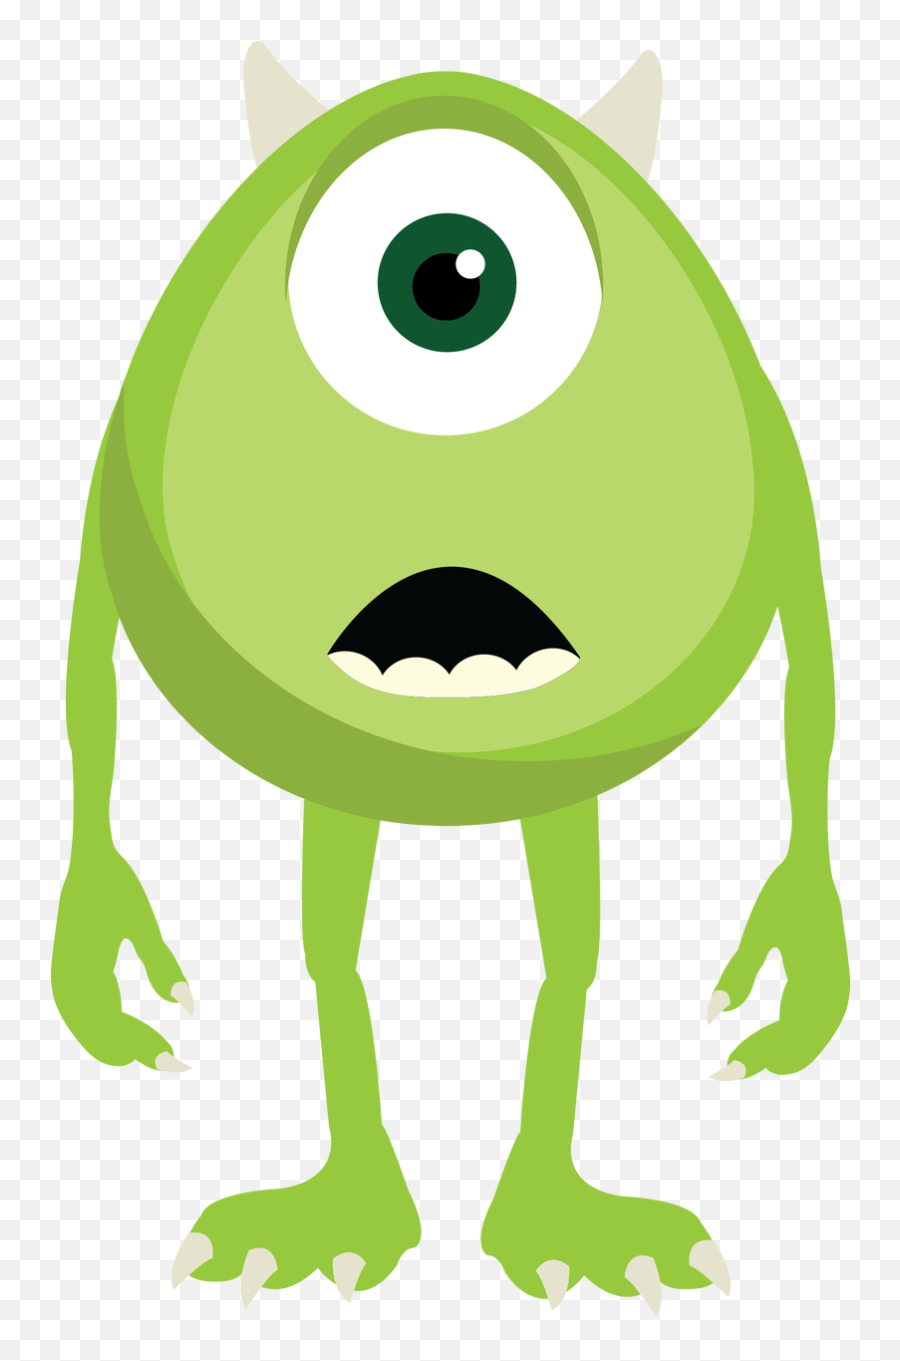 Iu0027ll Use This To Free Hand On A Cardboard For Props Emoji,Free Monster Clipart